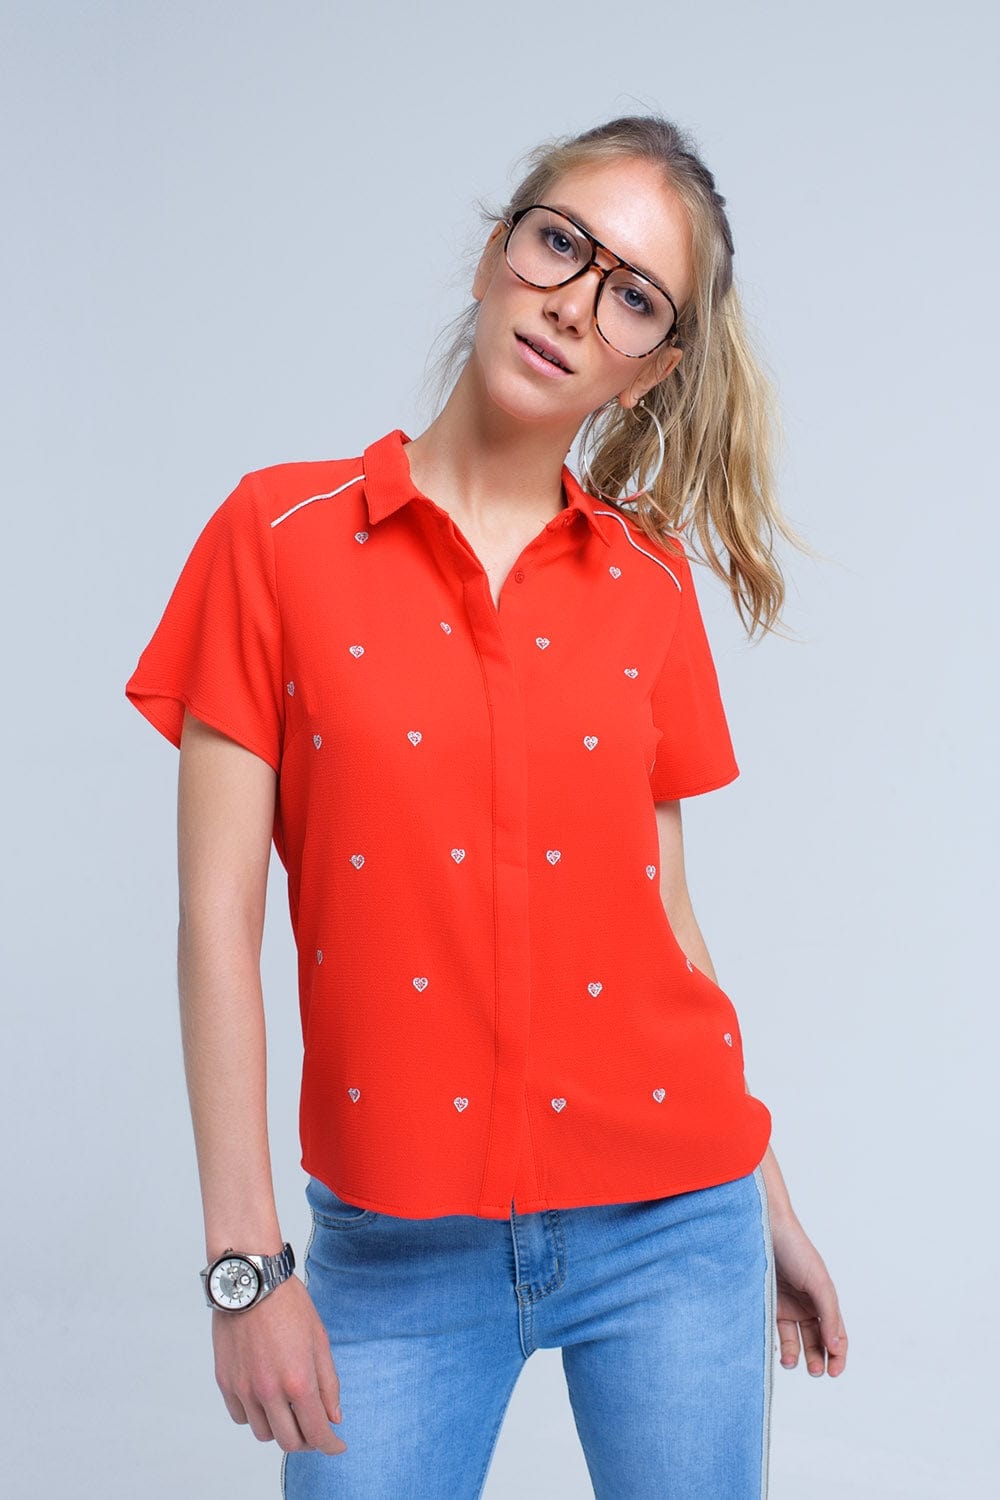 Q2 Women's Blouse Red shirt with heart embroidery